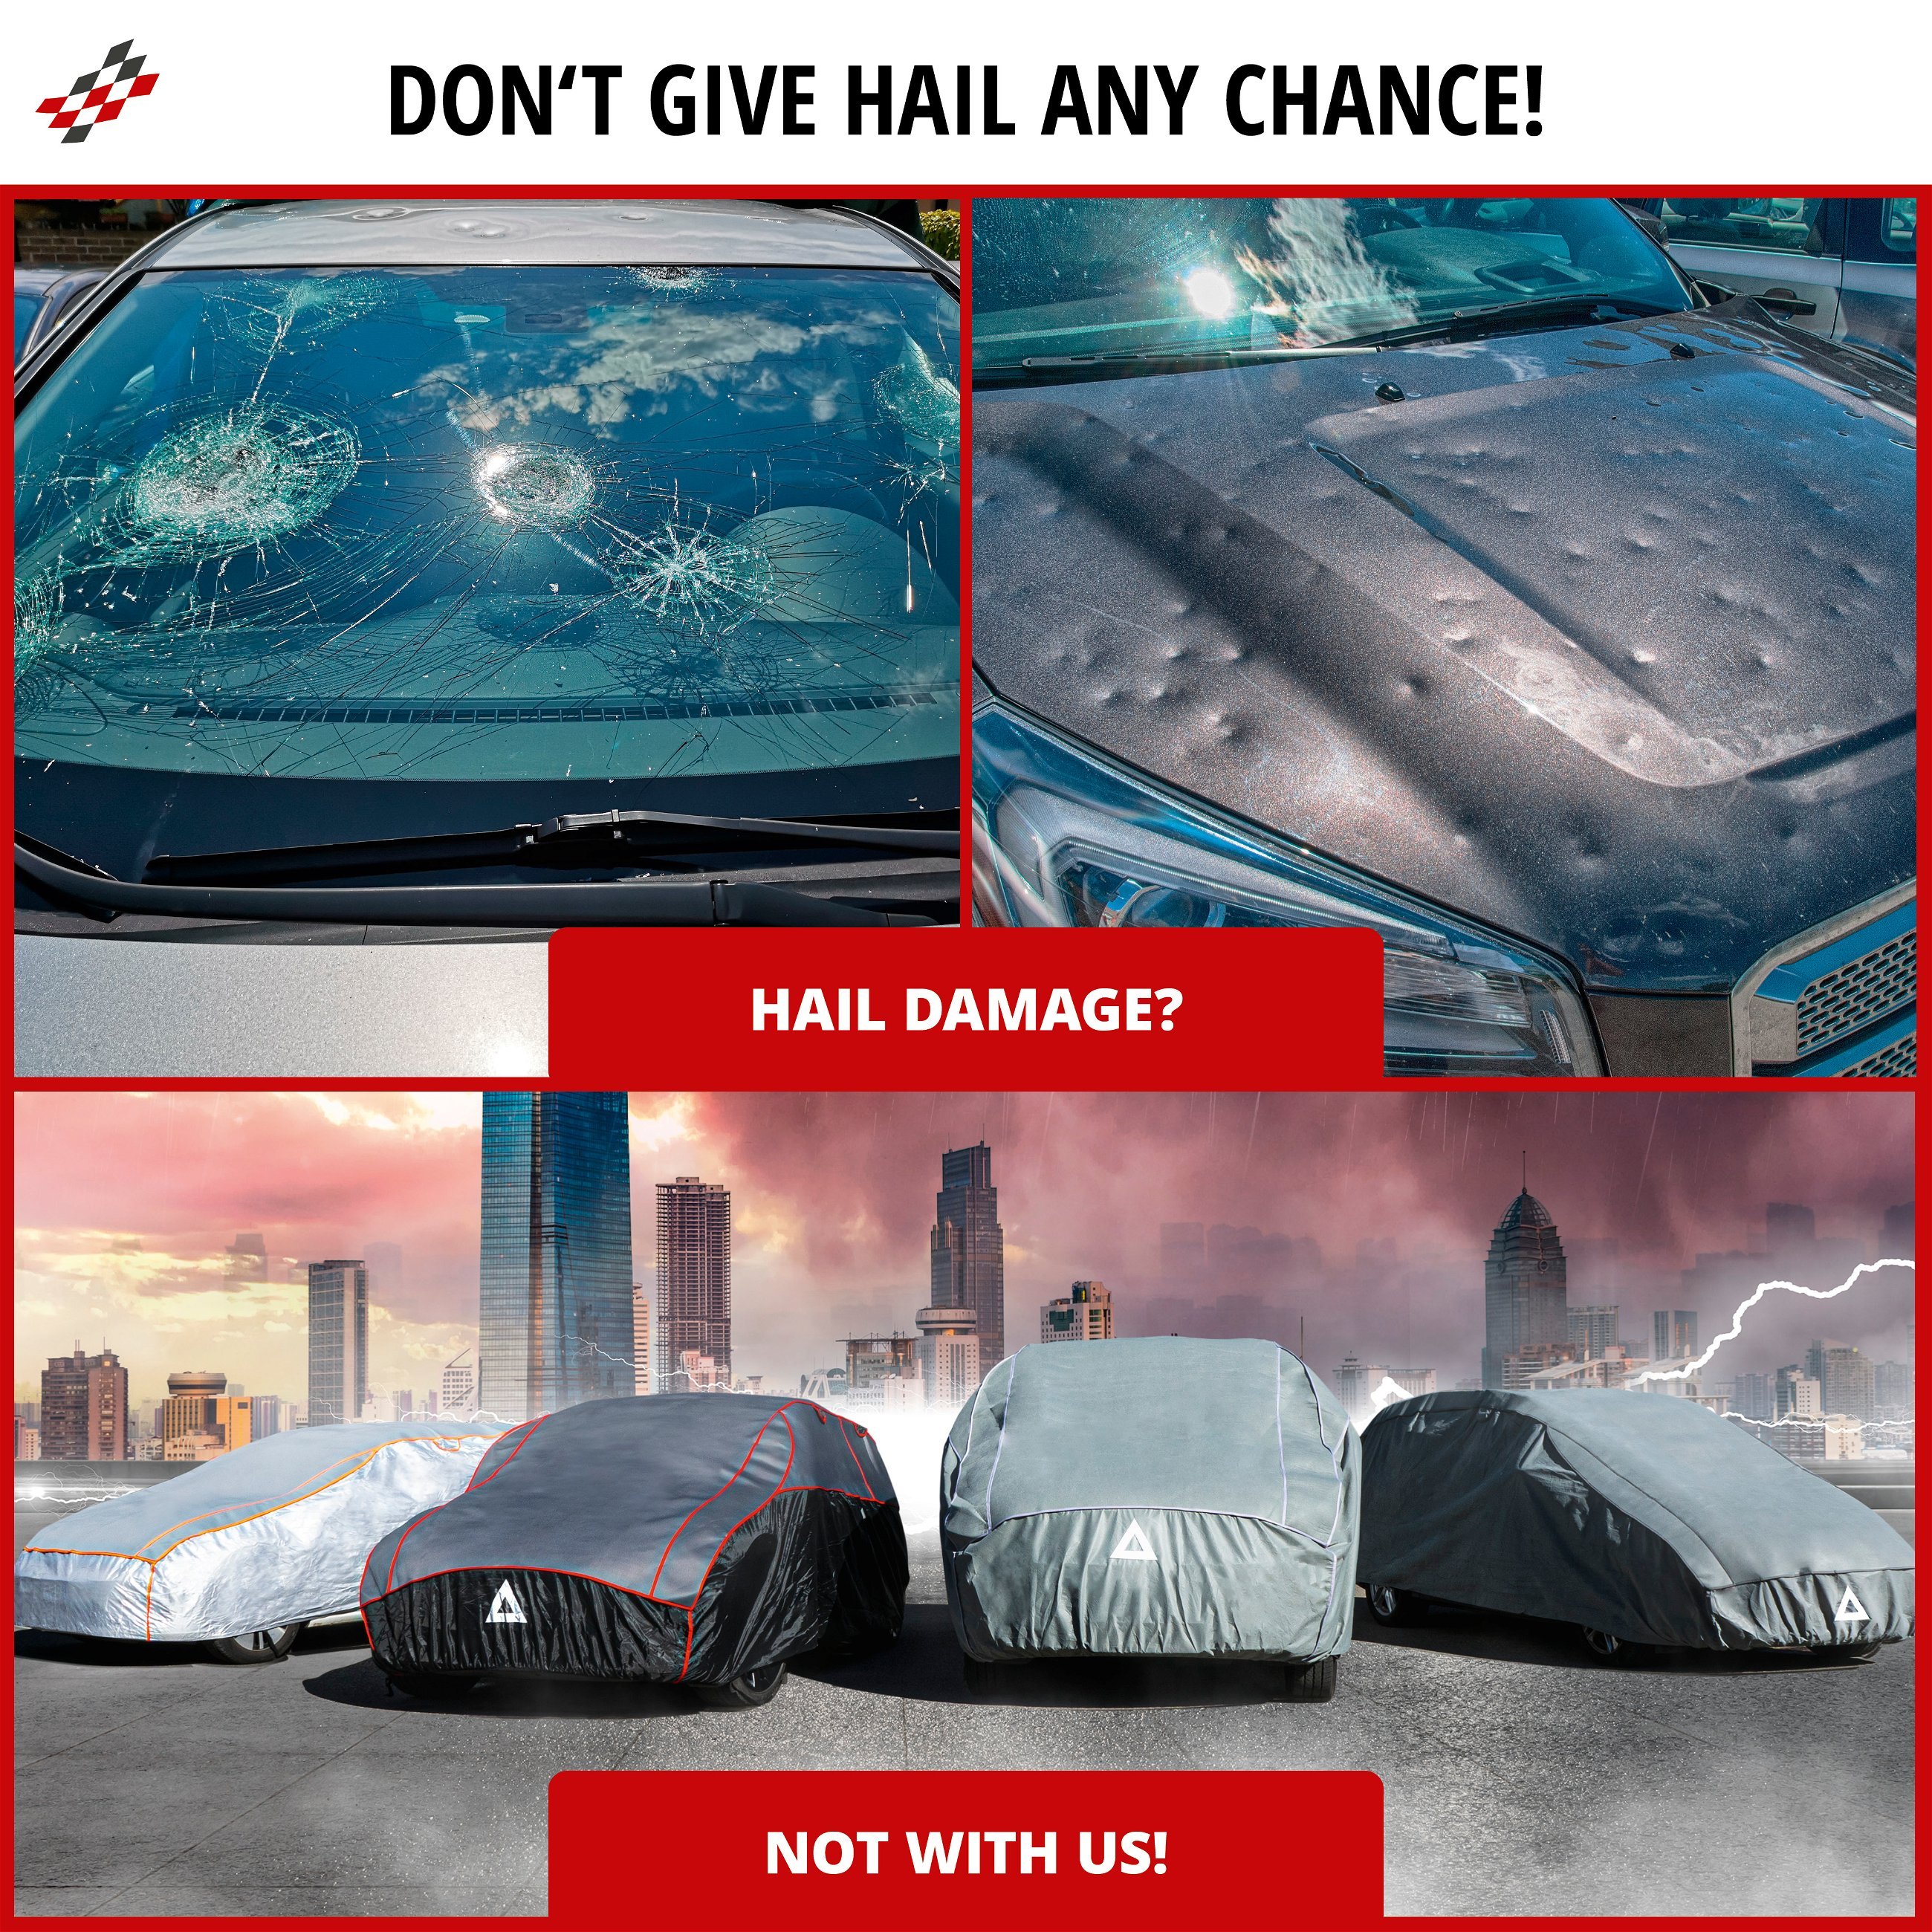 Car hail protection cover Hybrid UV Protect size XL